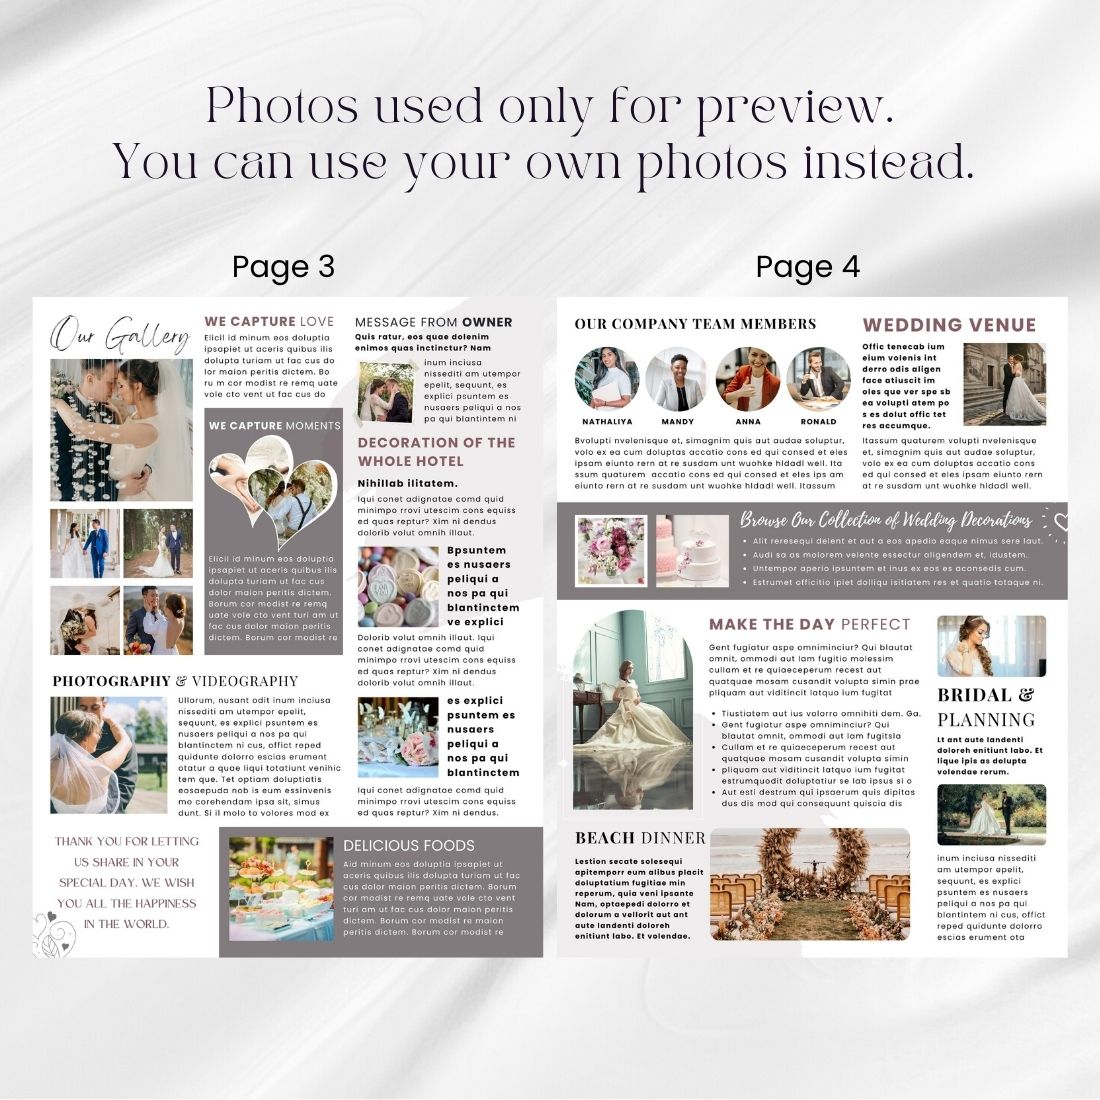 Email Newsletter Canva Template for Weddings and Engagements preview image.